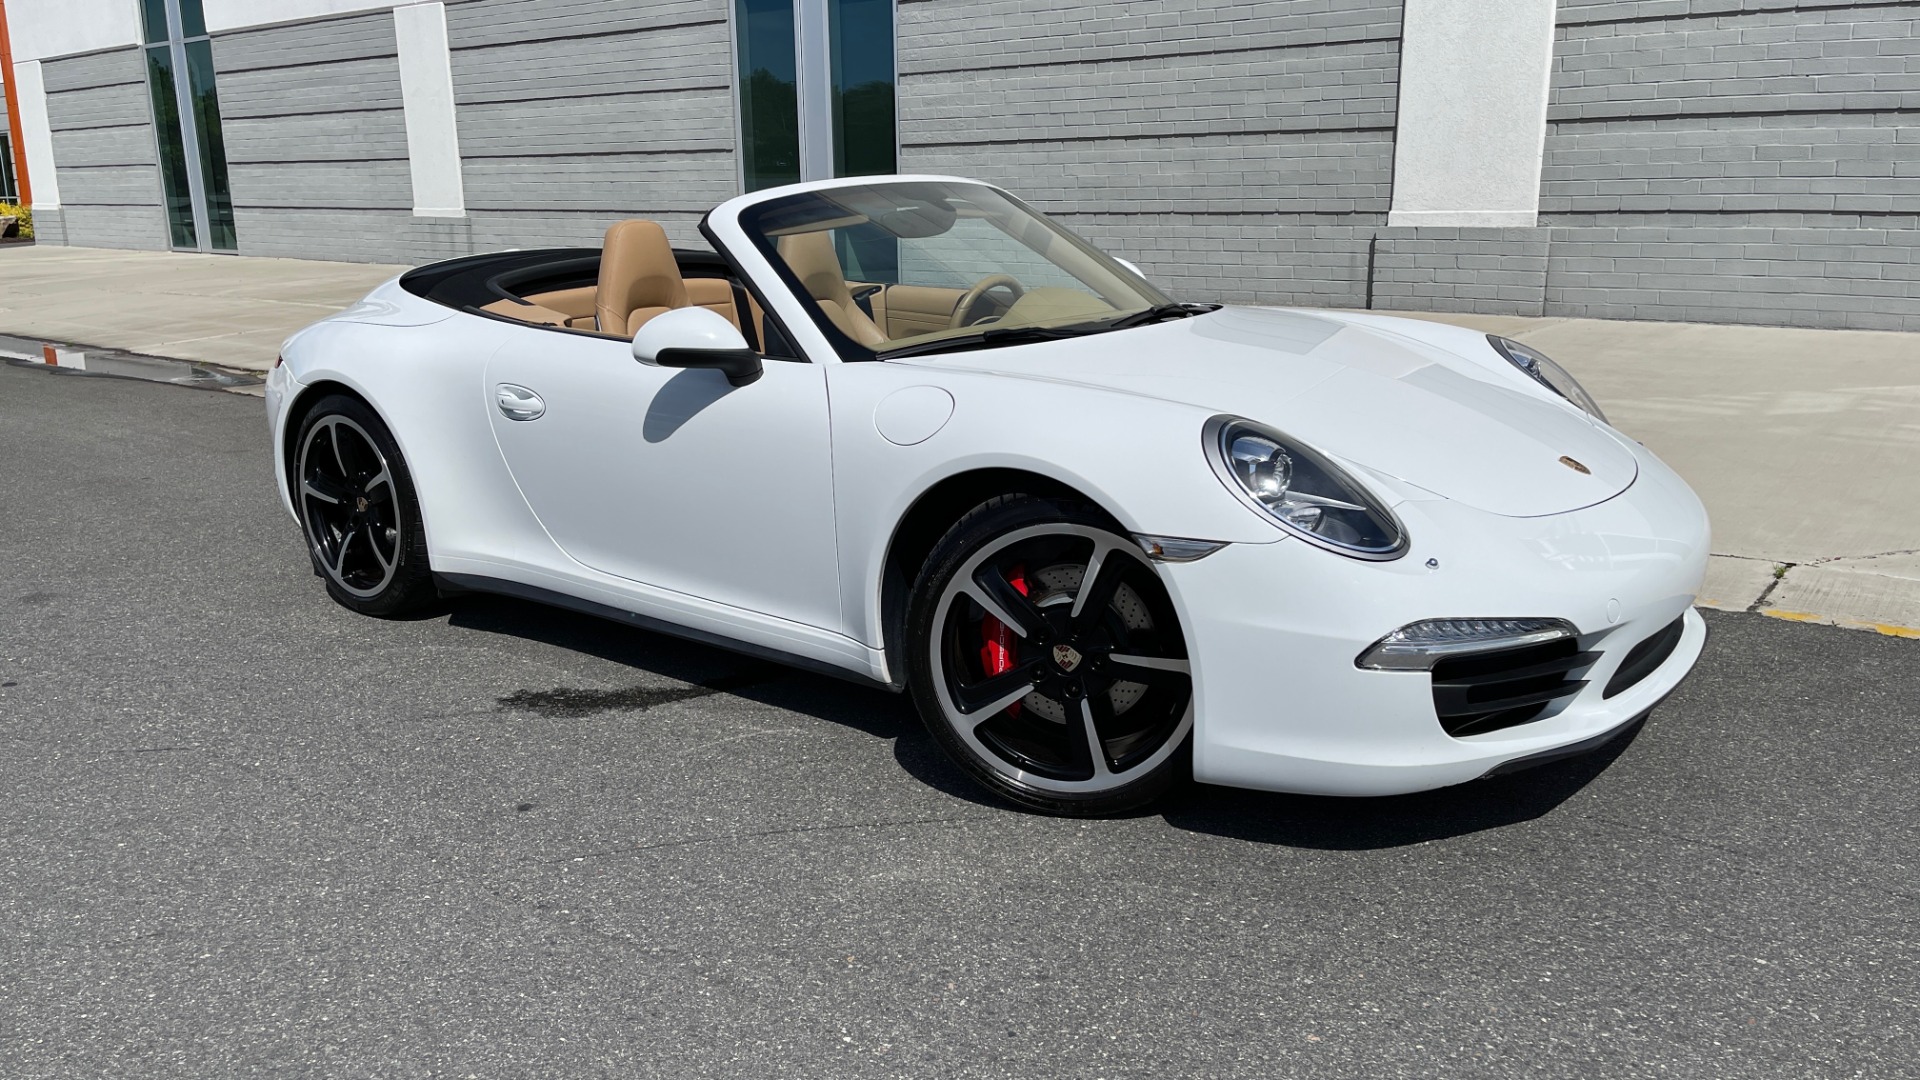 Used 2013 Porsche 911 CARRERA 4S CABRIOLET / PREMIUM PLUS / BOSE / PDK / PDLS for sale Sold at Formula Imports in Charlotte NC 28227 5